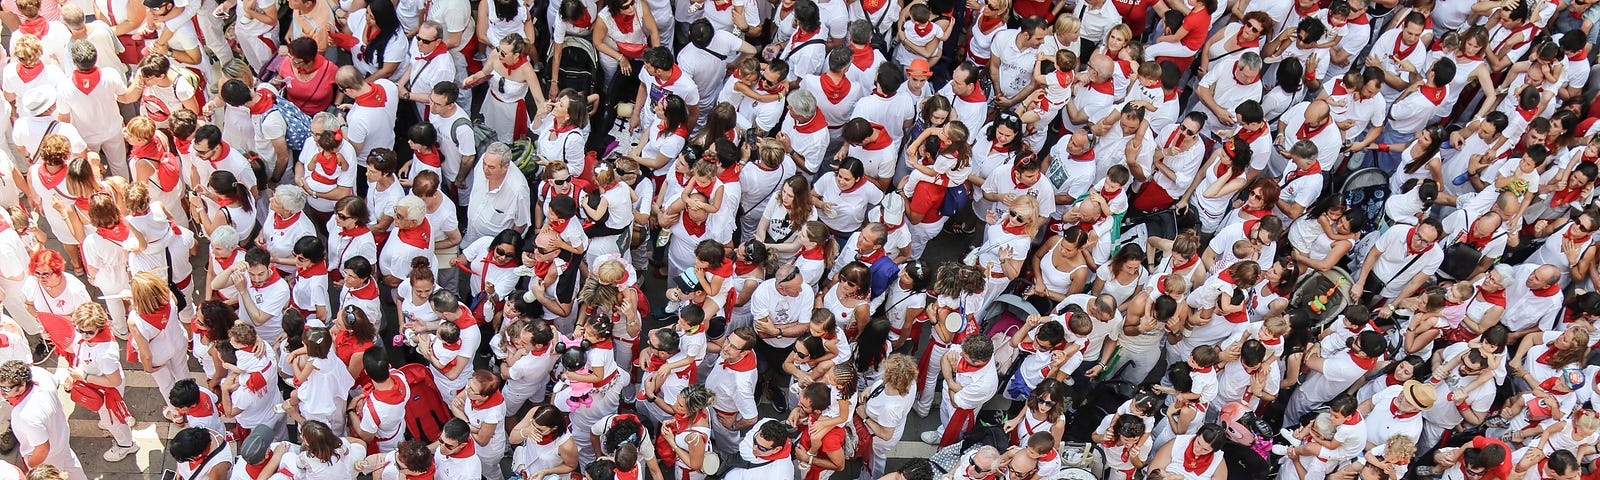 Picture of a crowd (view from above) at San Fermin’s Pamplona — all people wearing whit shirts